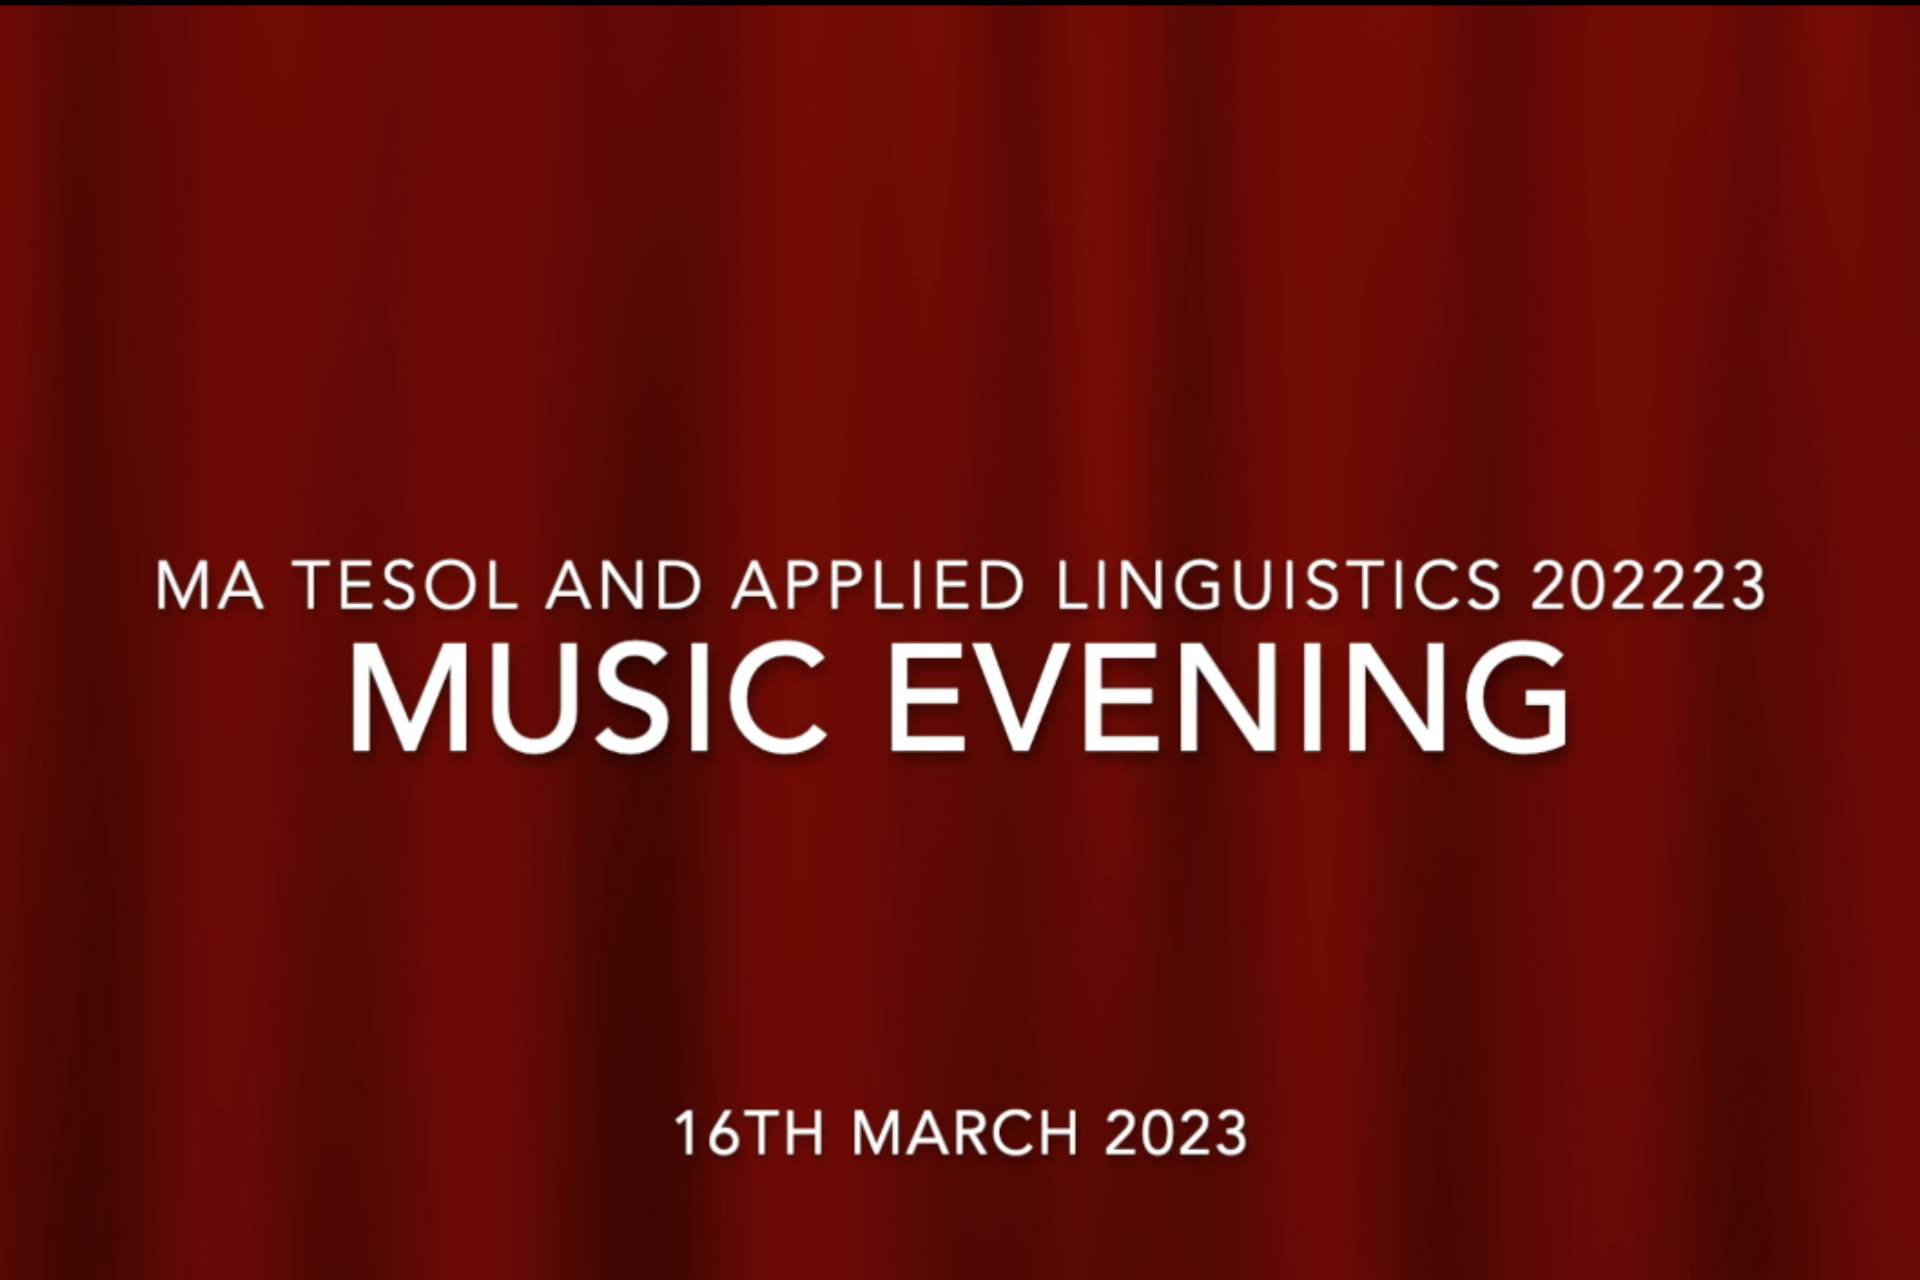 MA TESOL and Applied Linguistics Music Evening